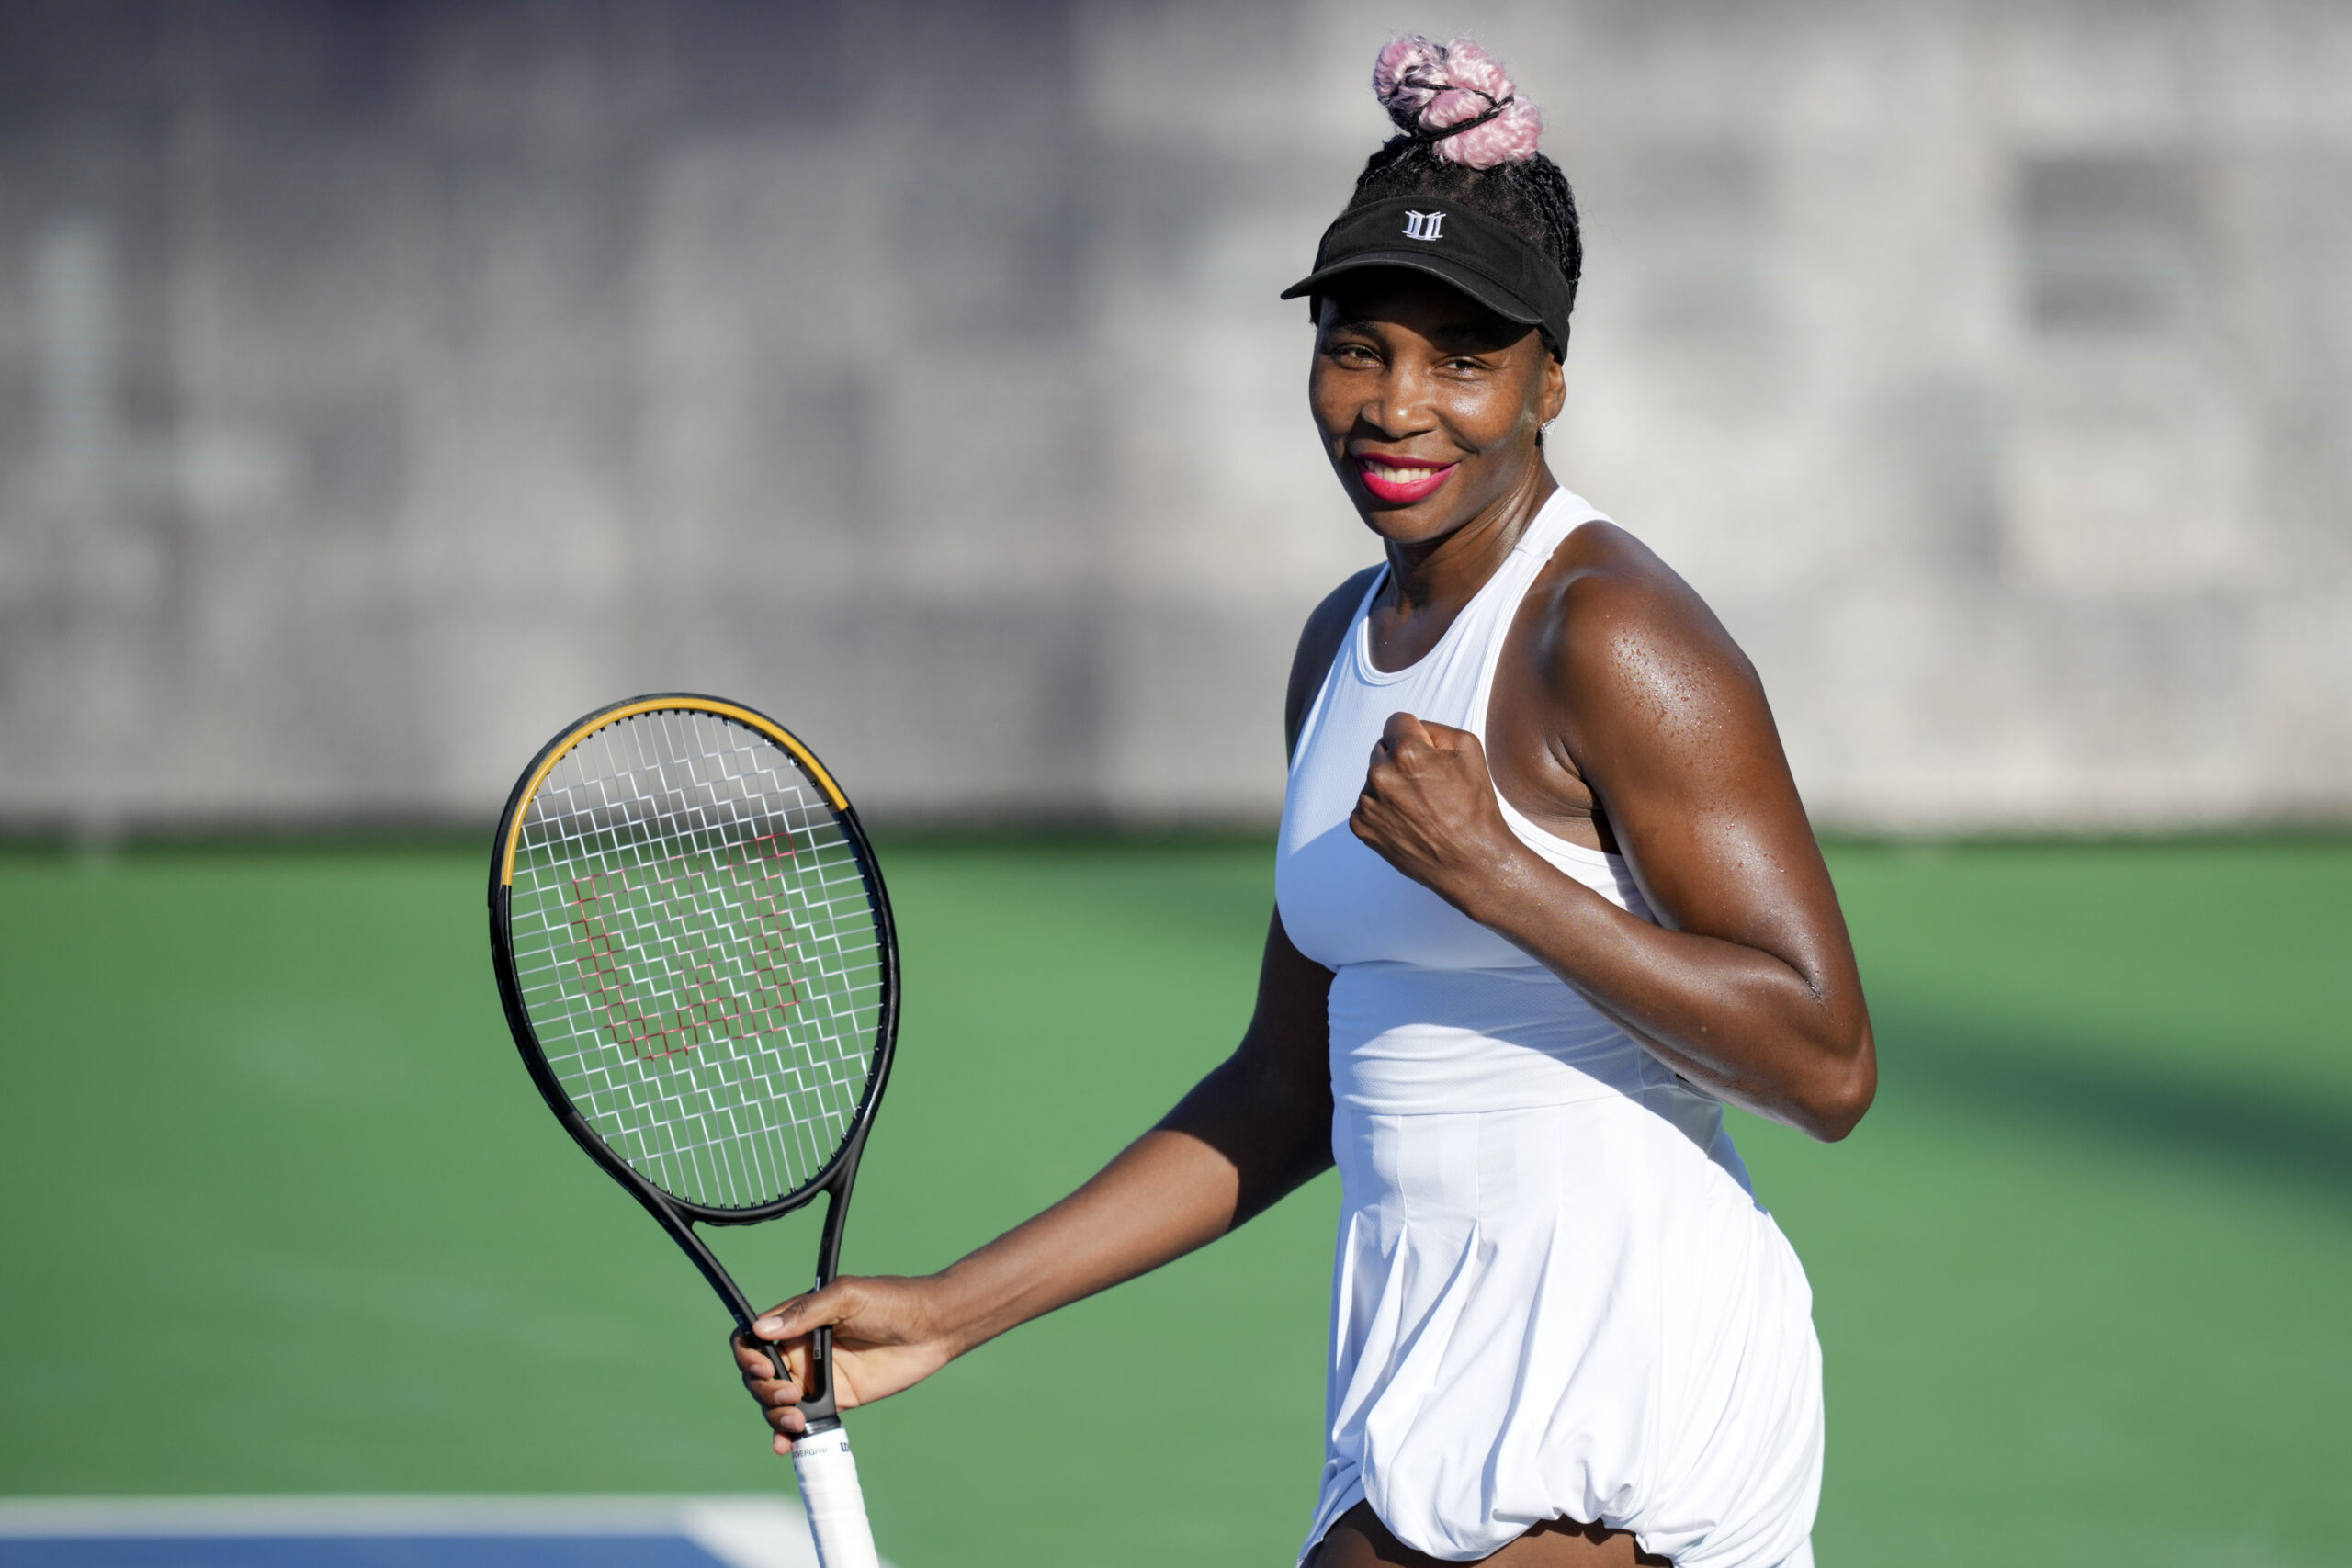 venus-williams,-caroline-wozniacki-and-john-isner-the-most-outstanding-guests-in-the-2023-edition-of-the-united-states-open